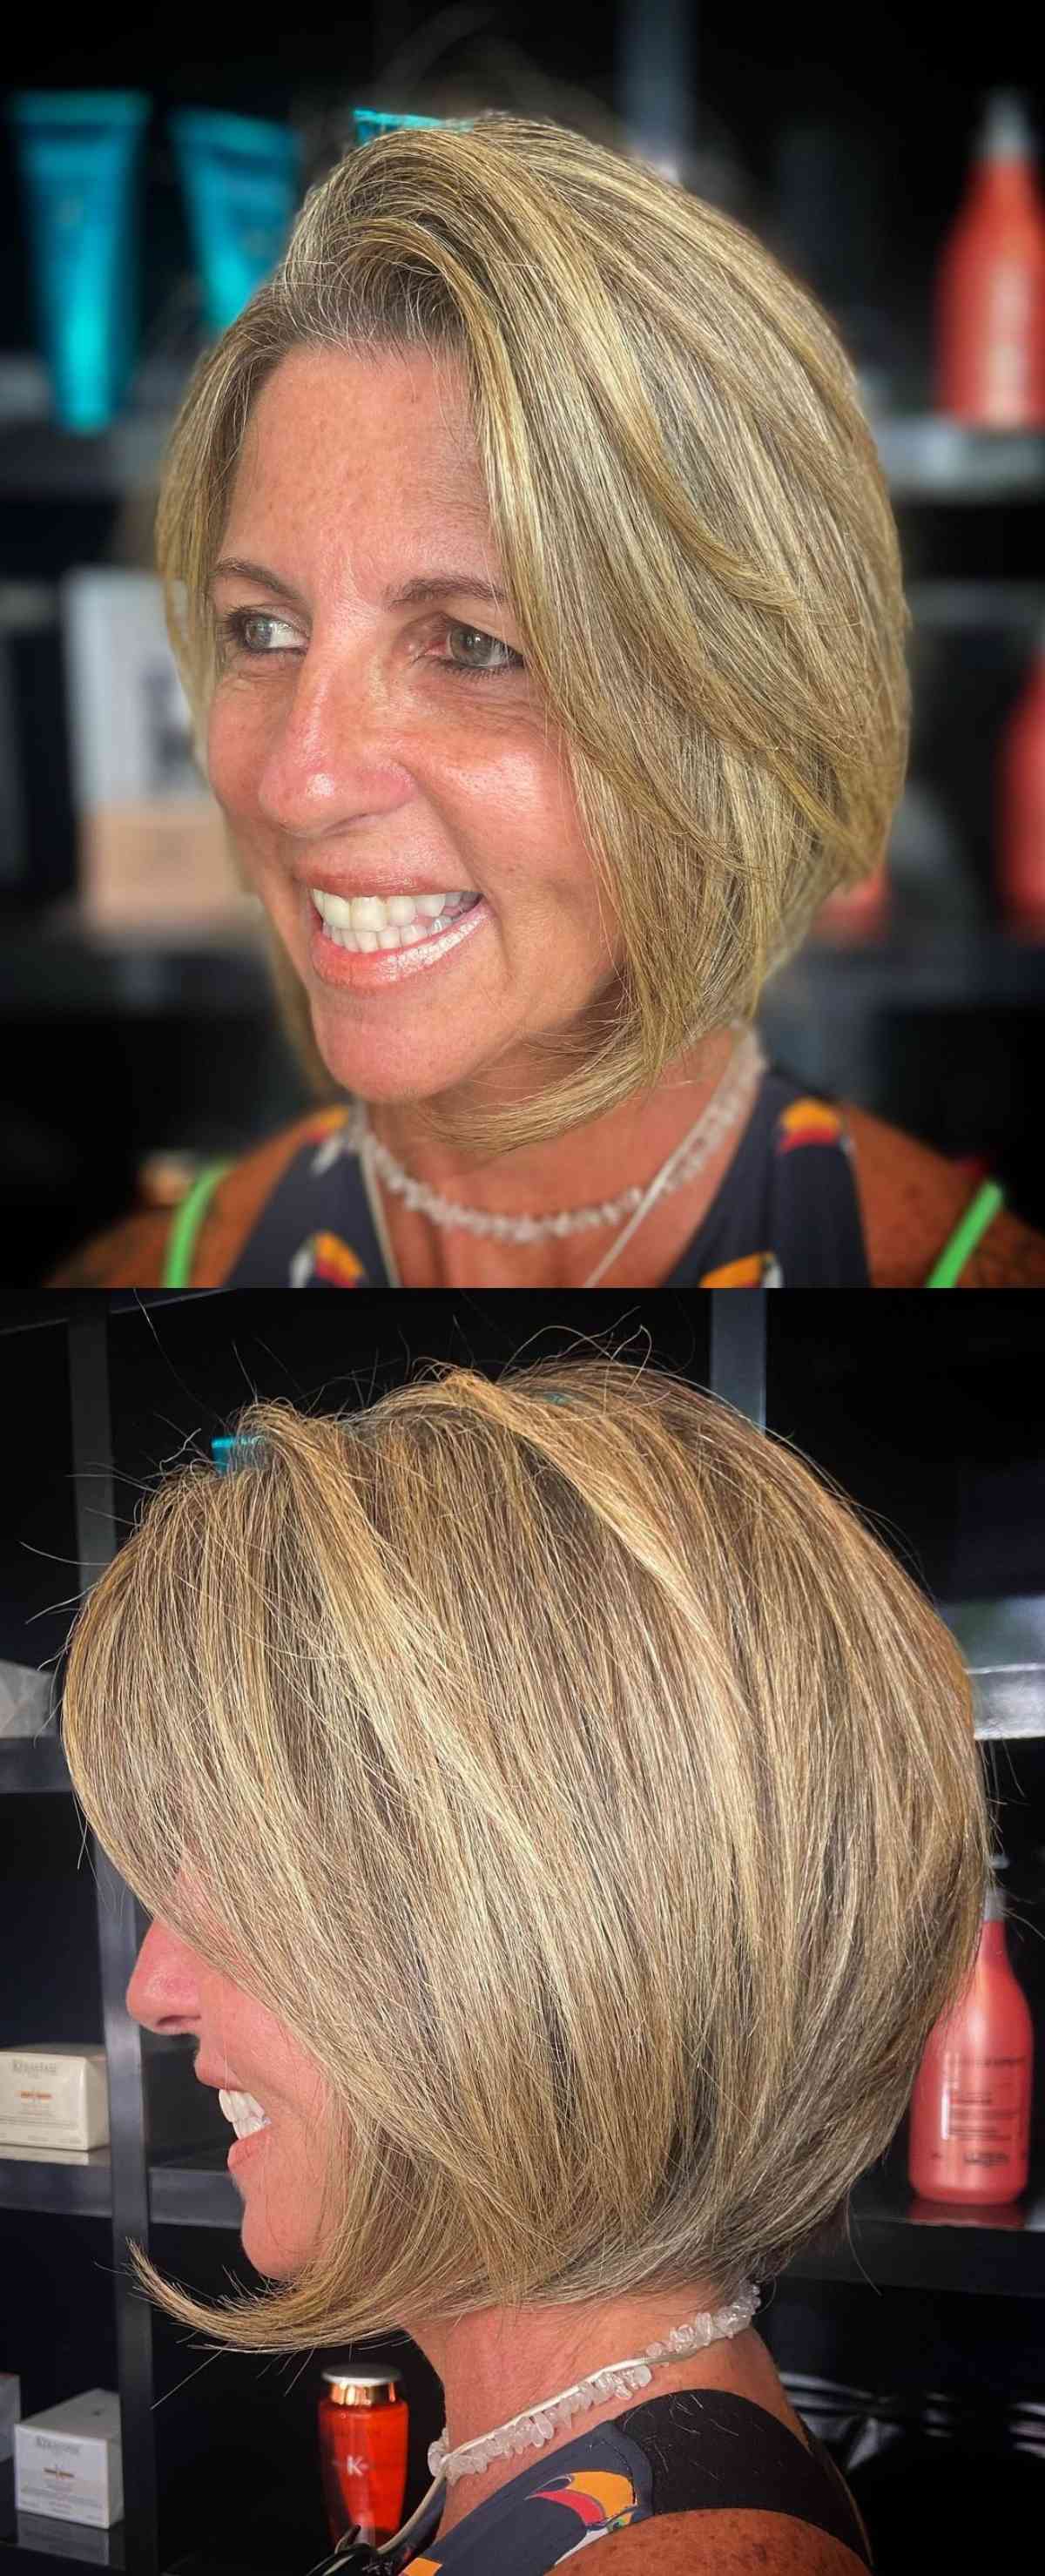 Dirty Blonde Bob Haircut for Ladies 50 and Over